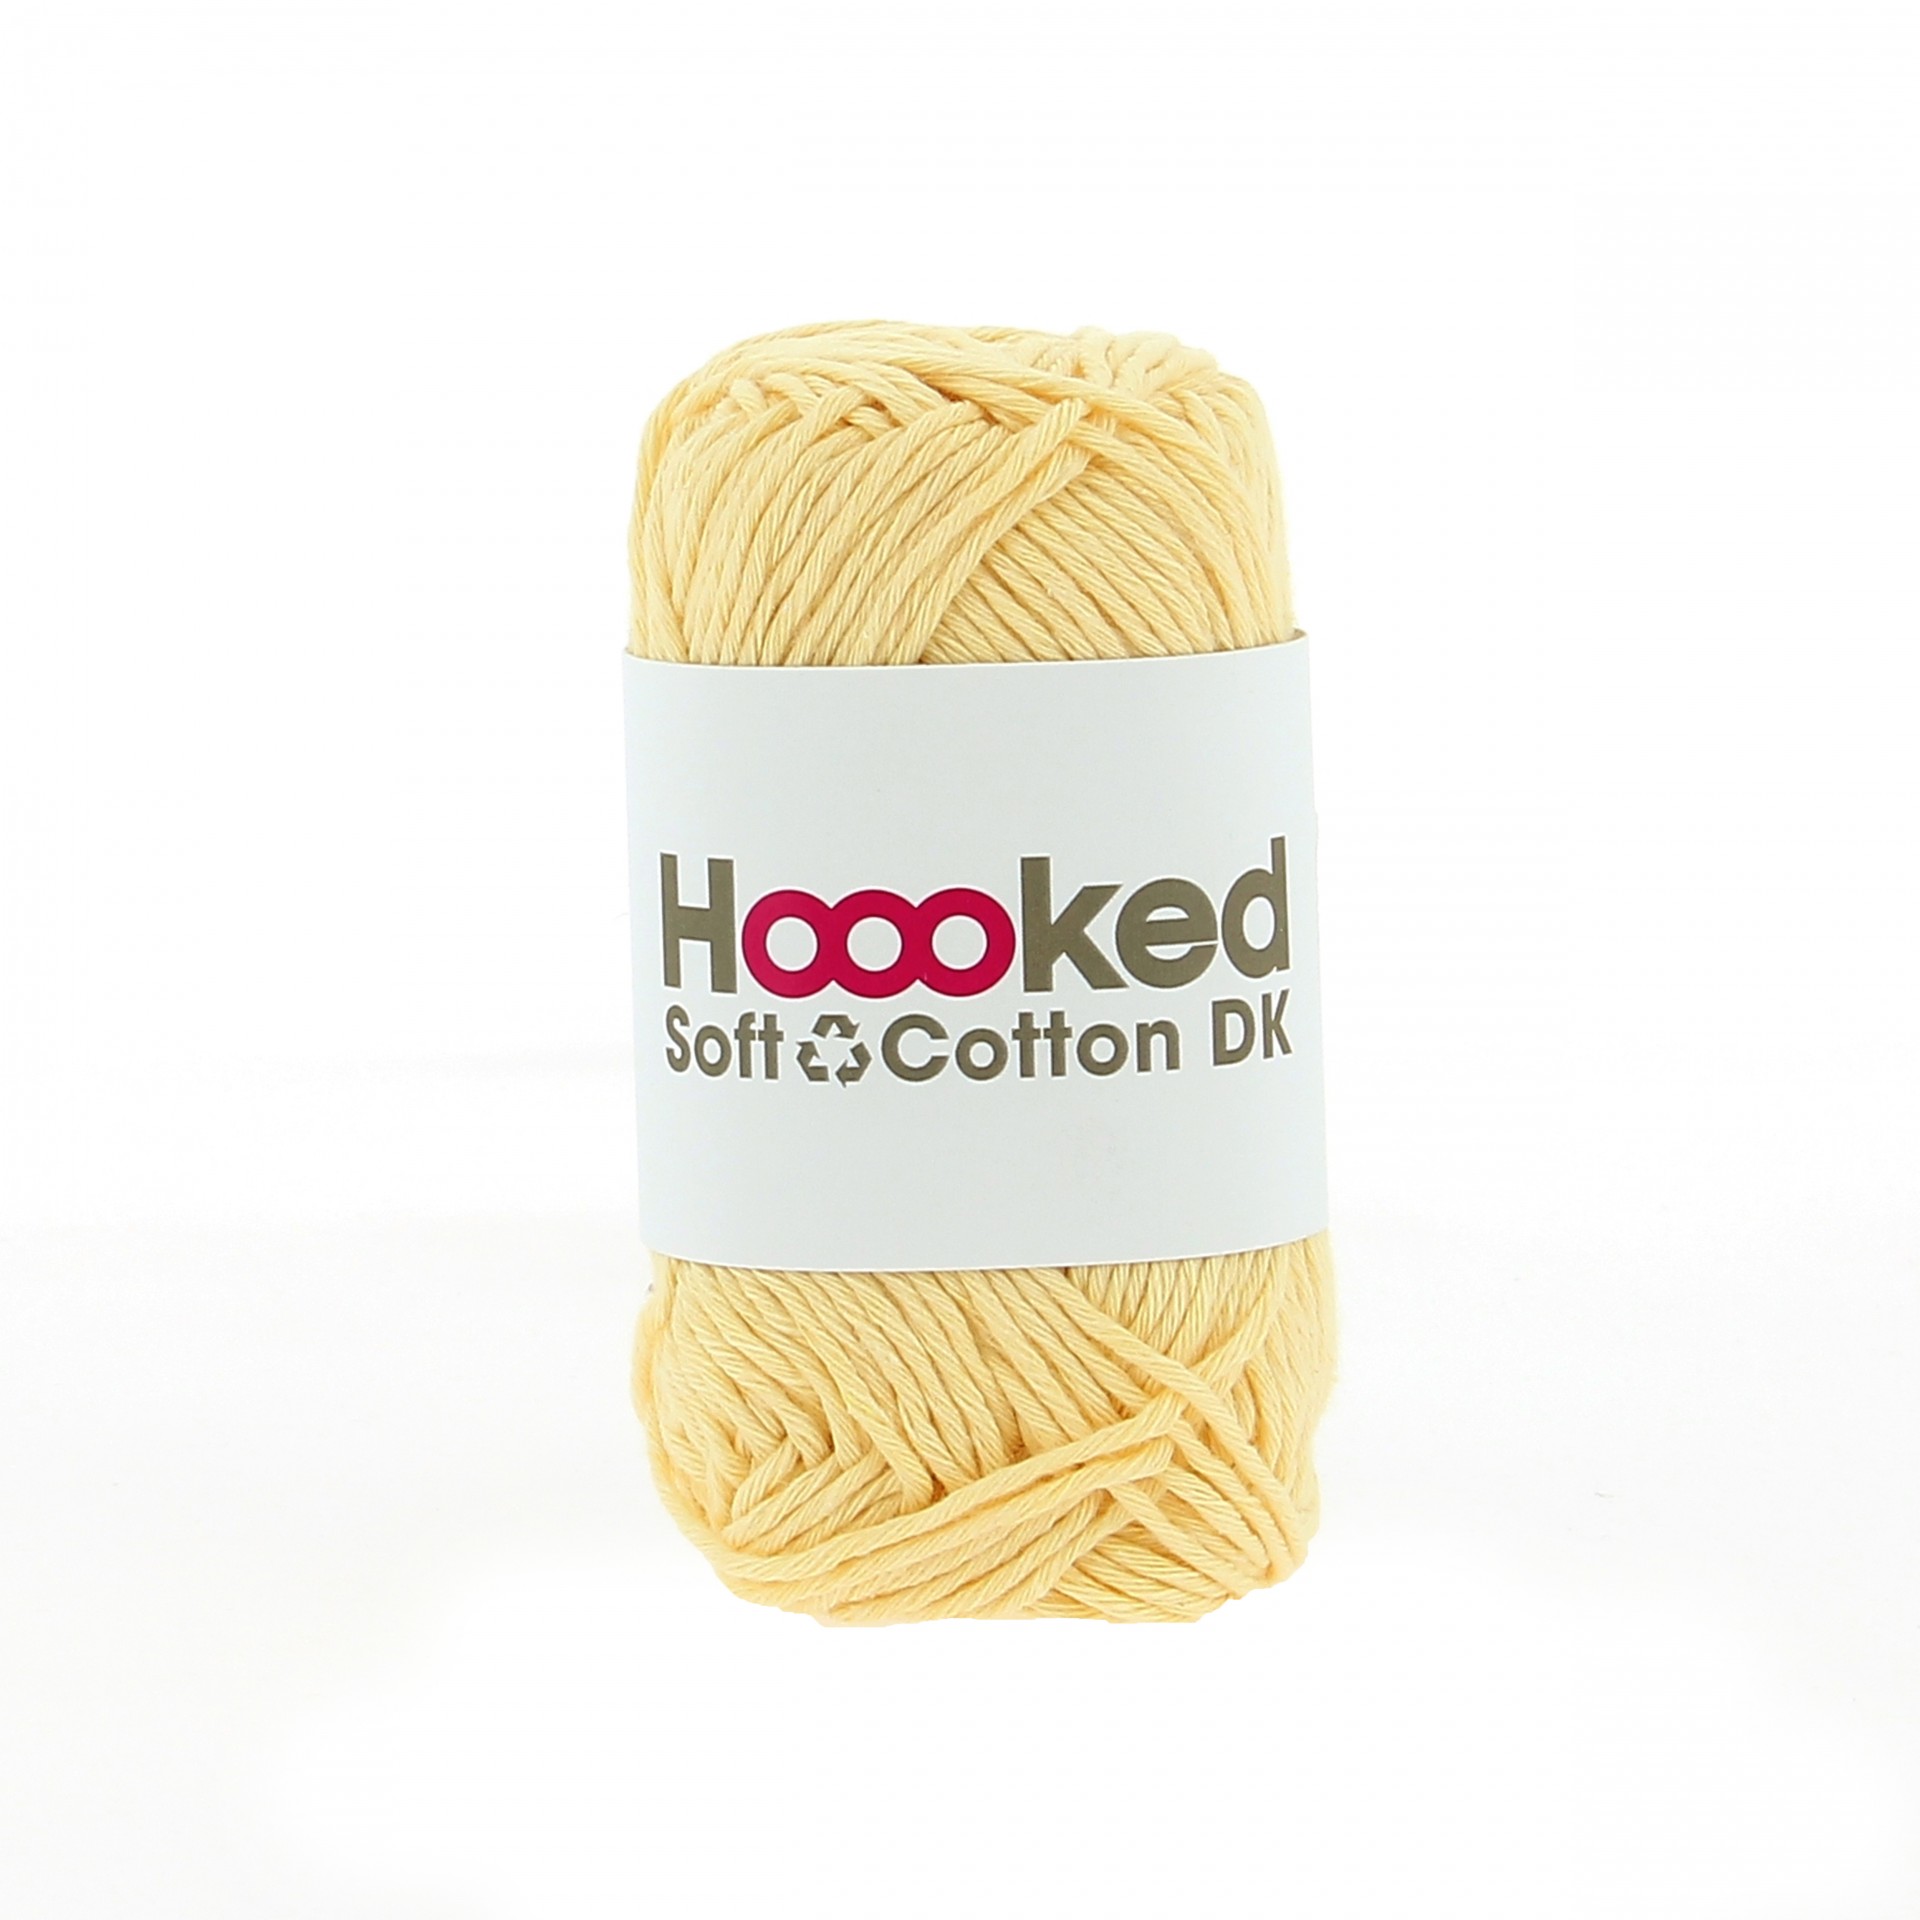 Hoooked Soft Cotton DK